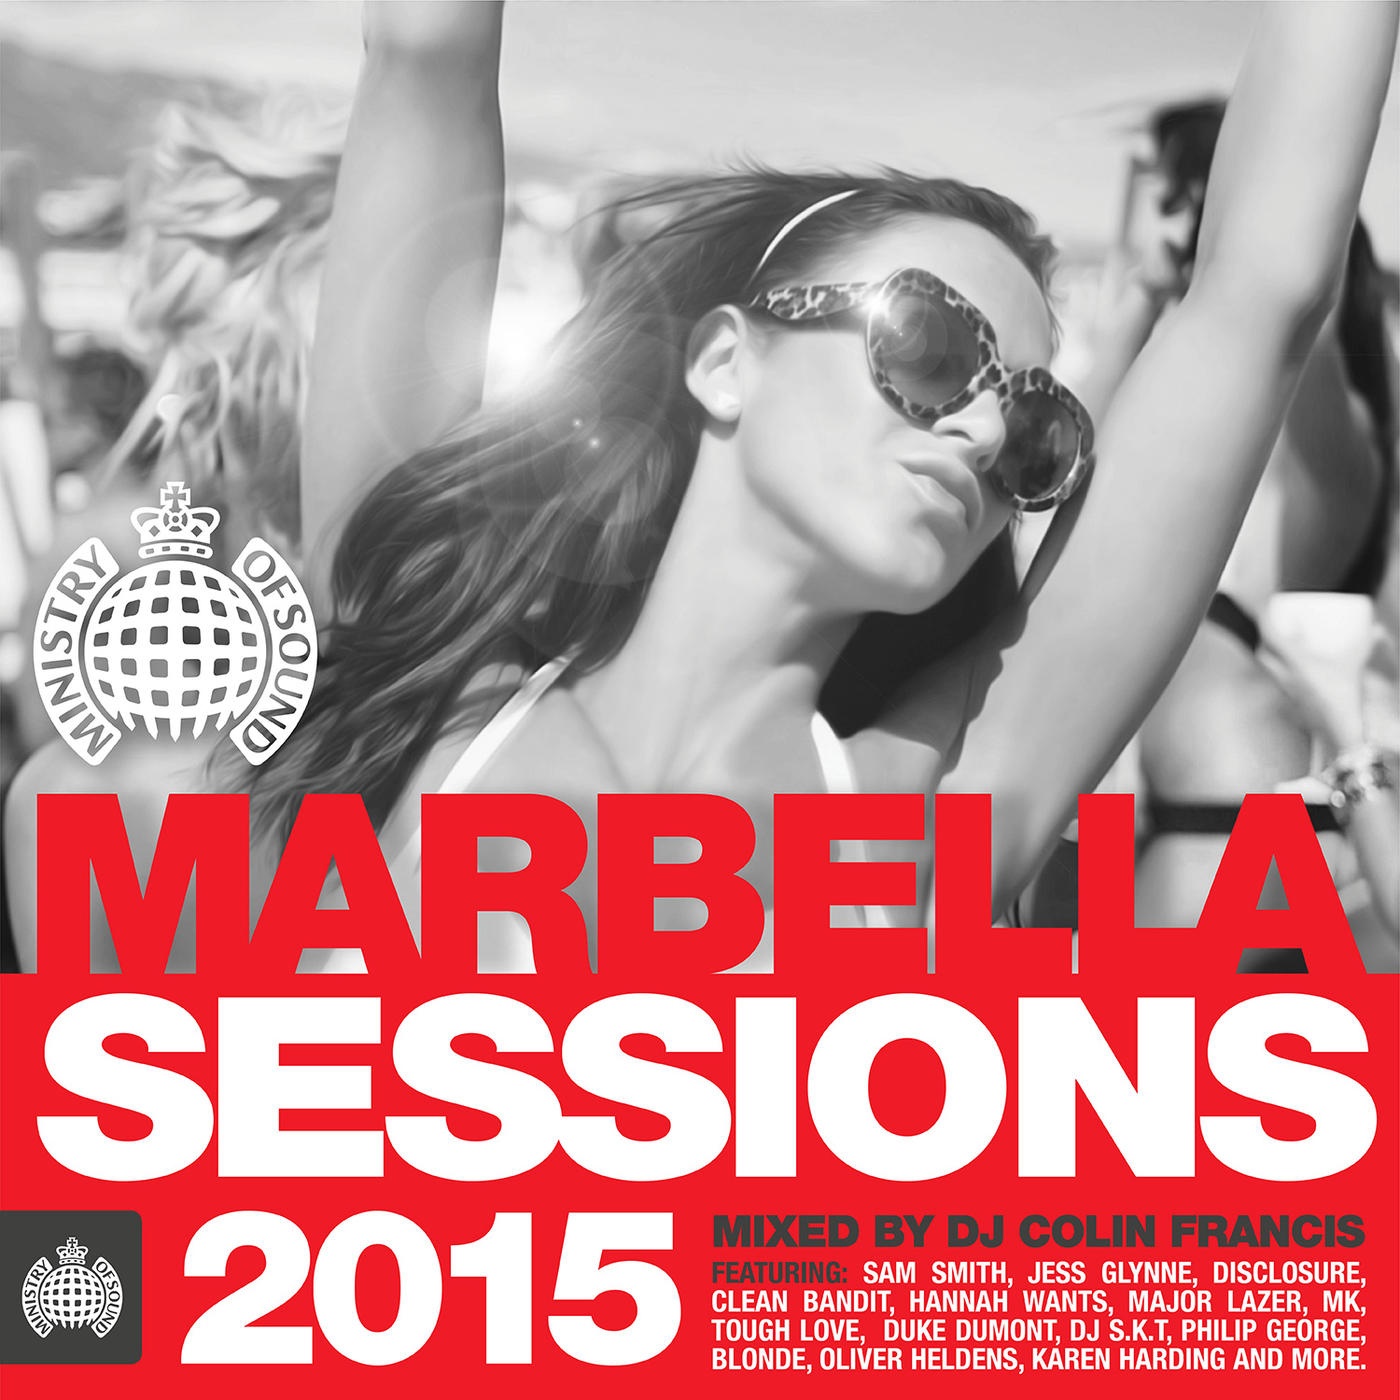 Marbella Sessions 2015 (Continuous Mix 1 - Pool Party Mix By DJ Colin Francis)